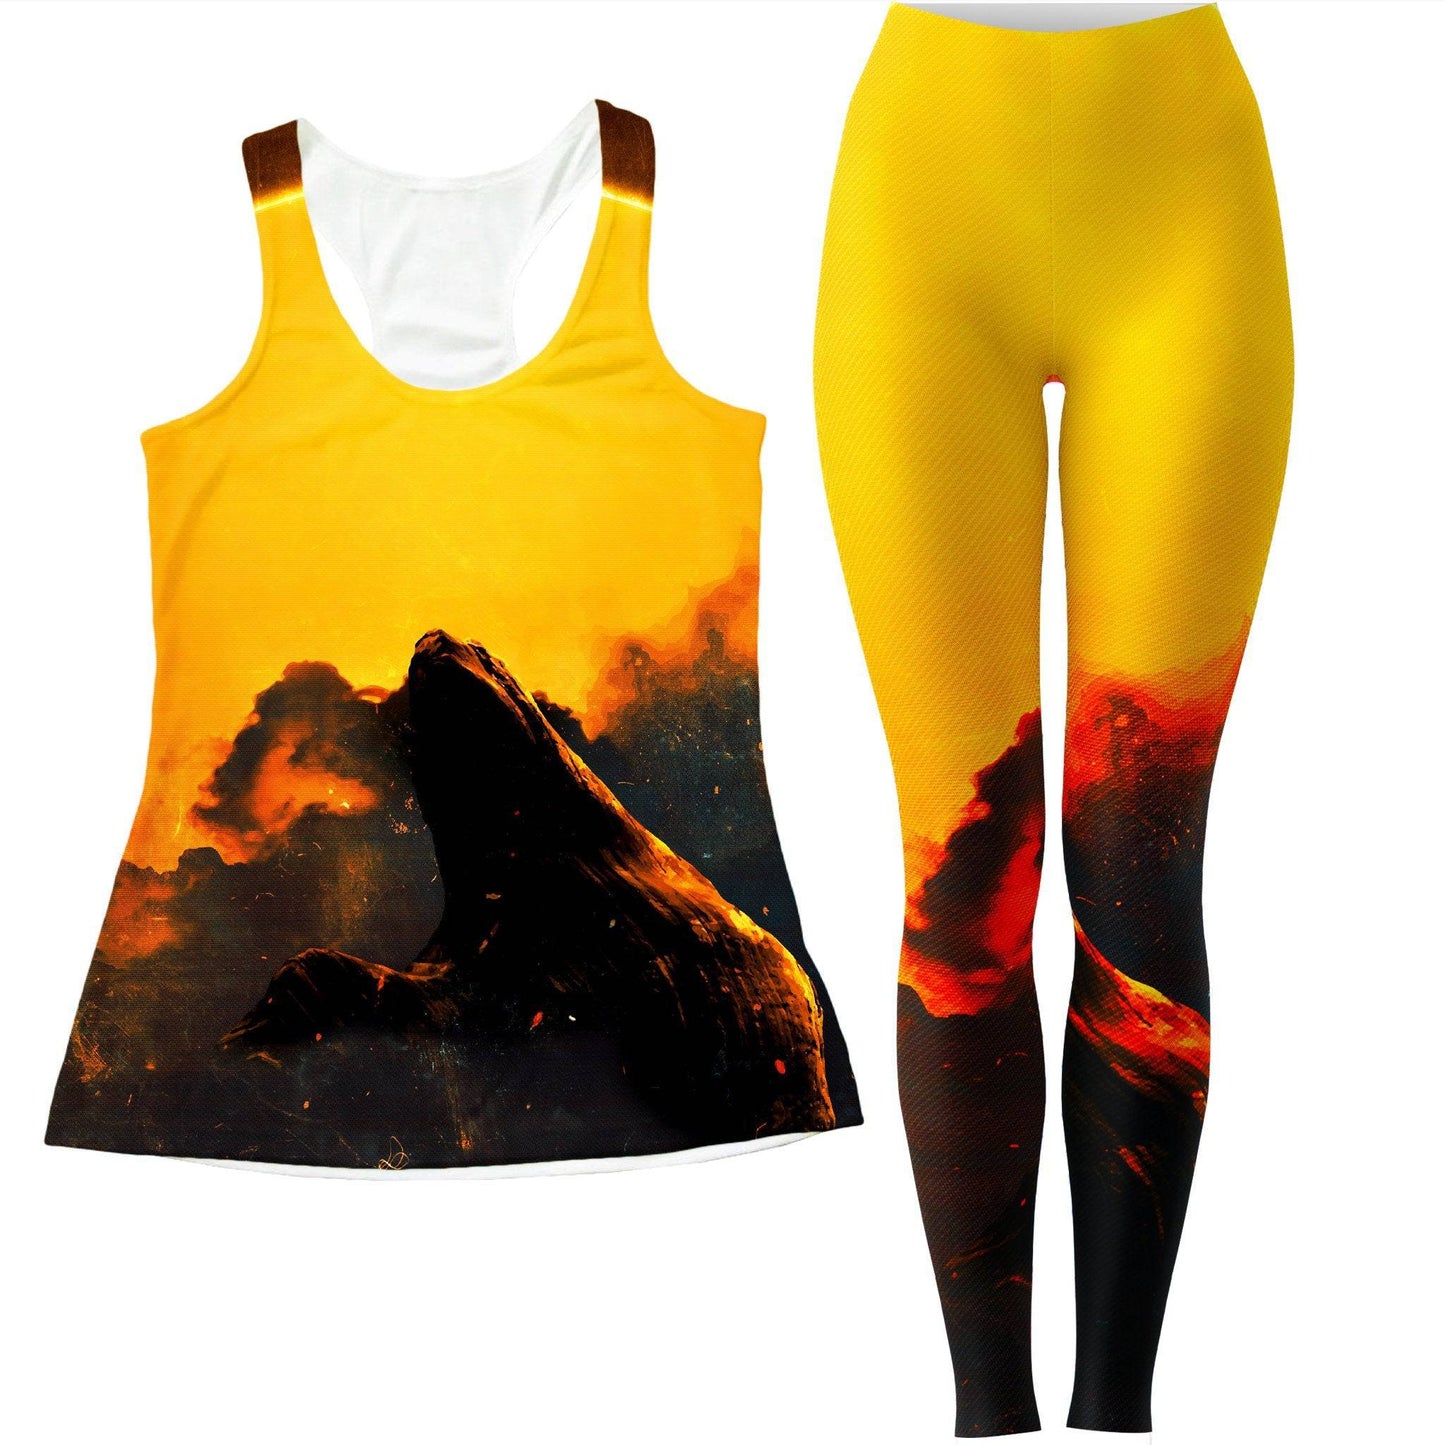 Easy Changes Women's Tank and Leggings Combo, Adam Priester, | iEDM